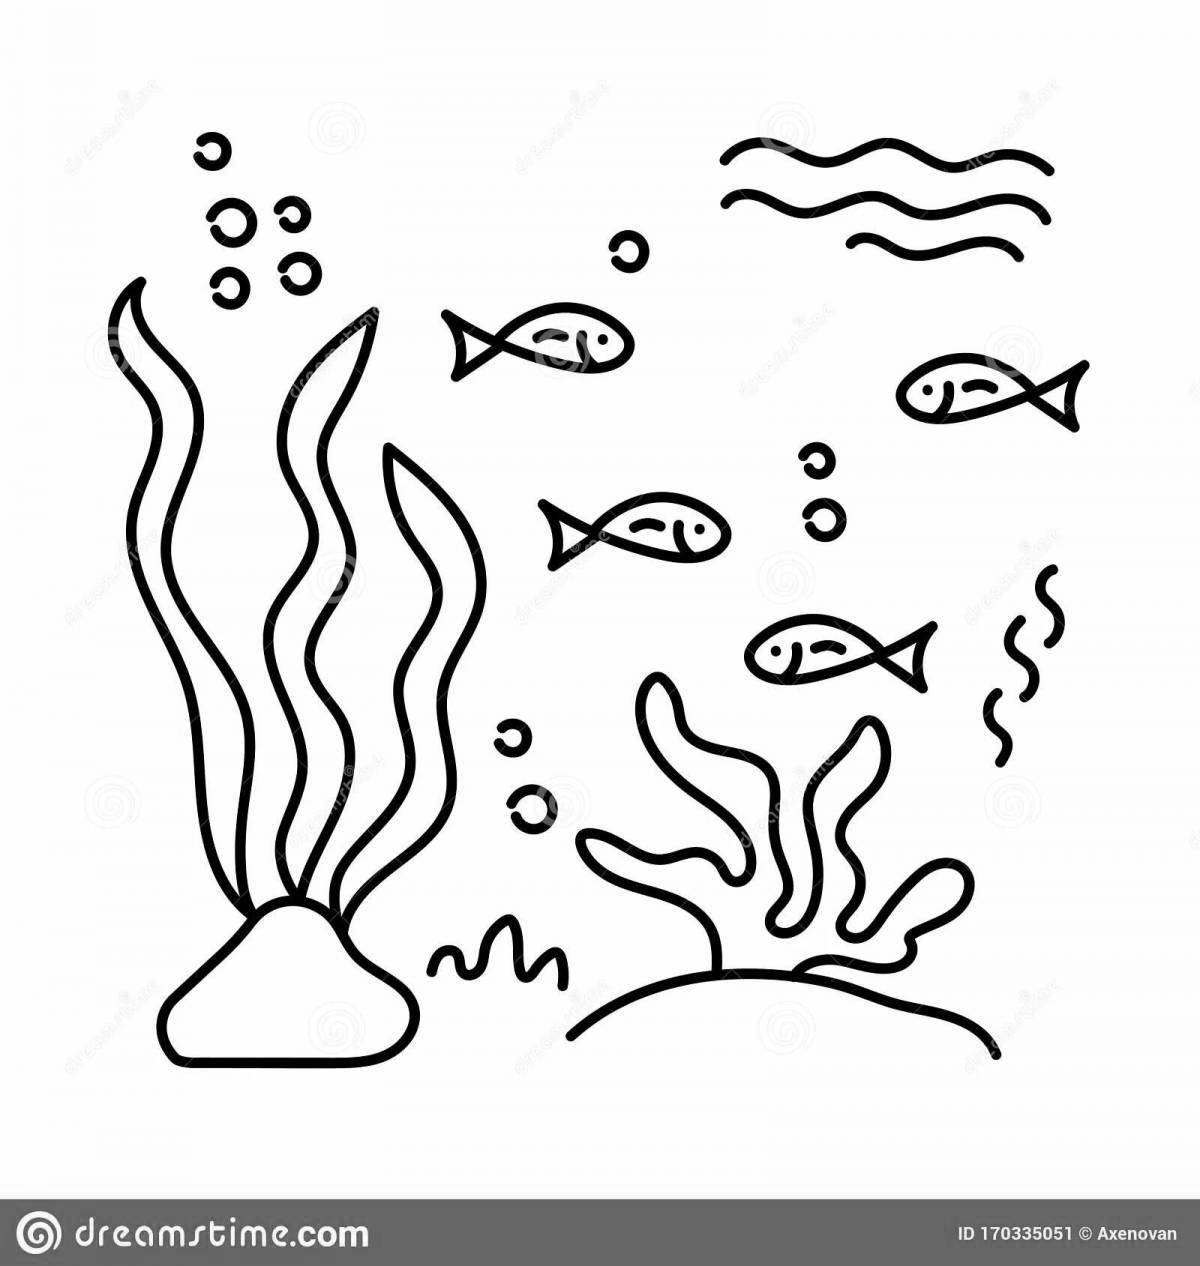 Coloured algae coloring pages for children